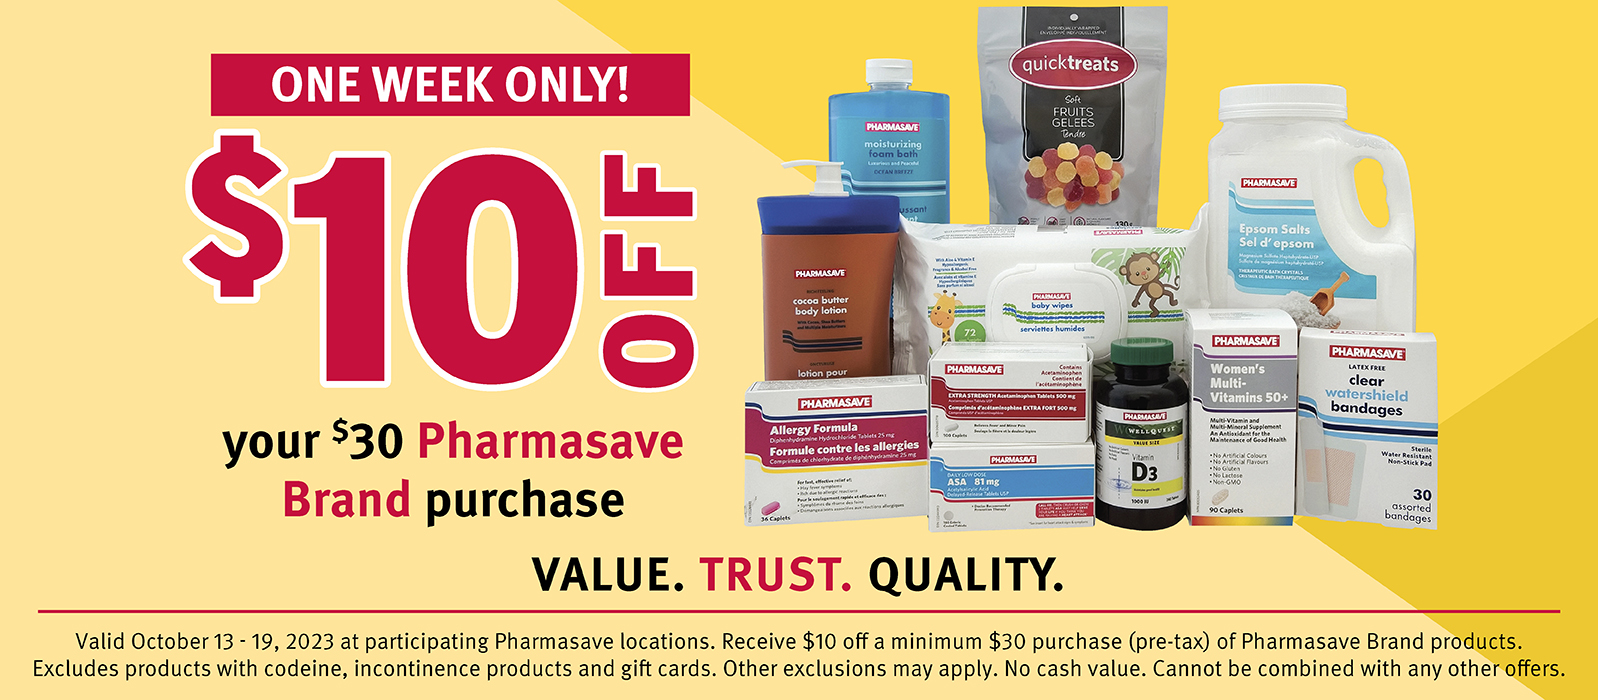 $10 off on 430 pharmasave brand purchase